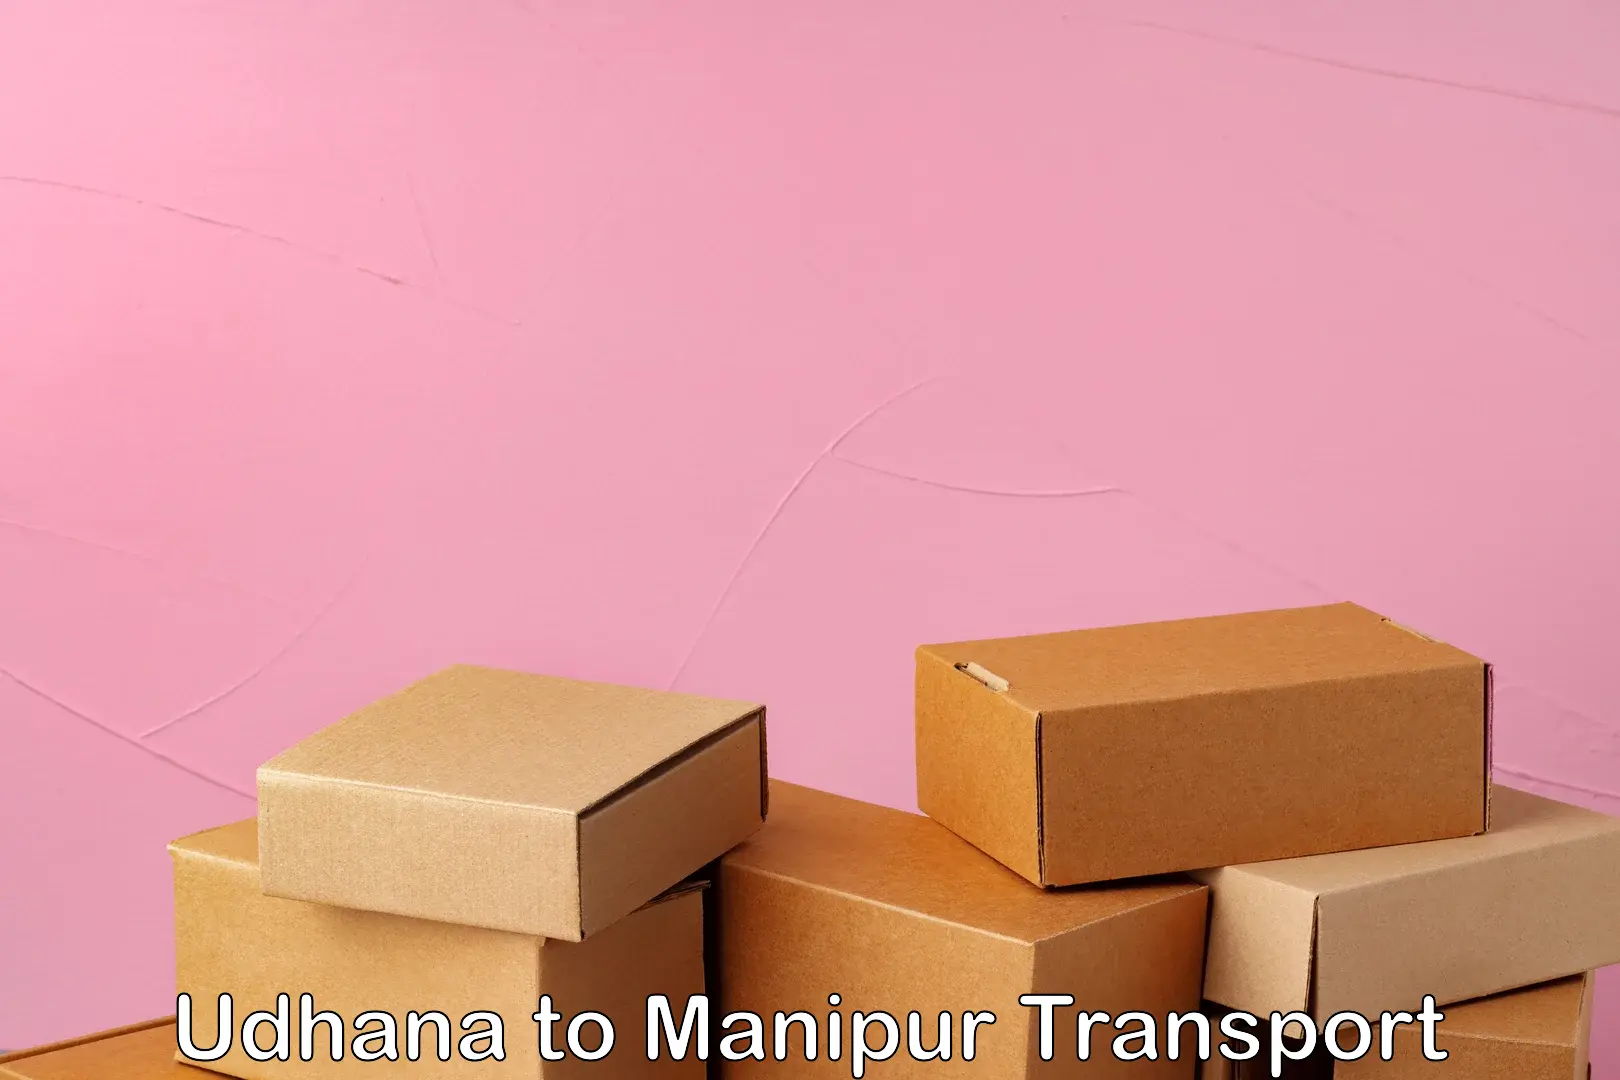 Cargo train transport services Udhana to Manipur